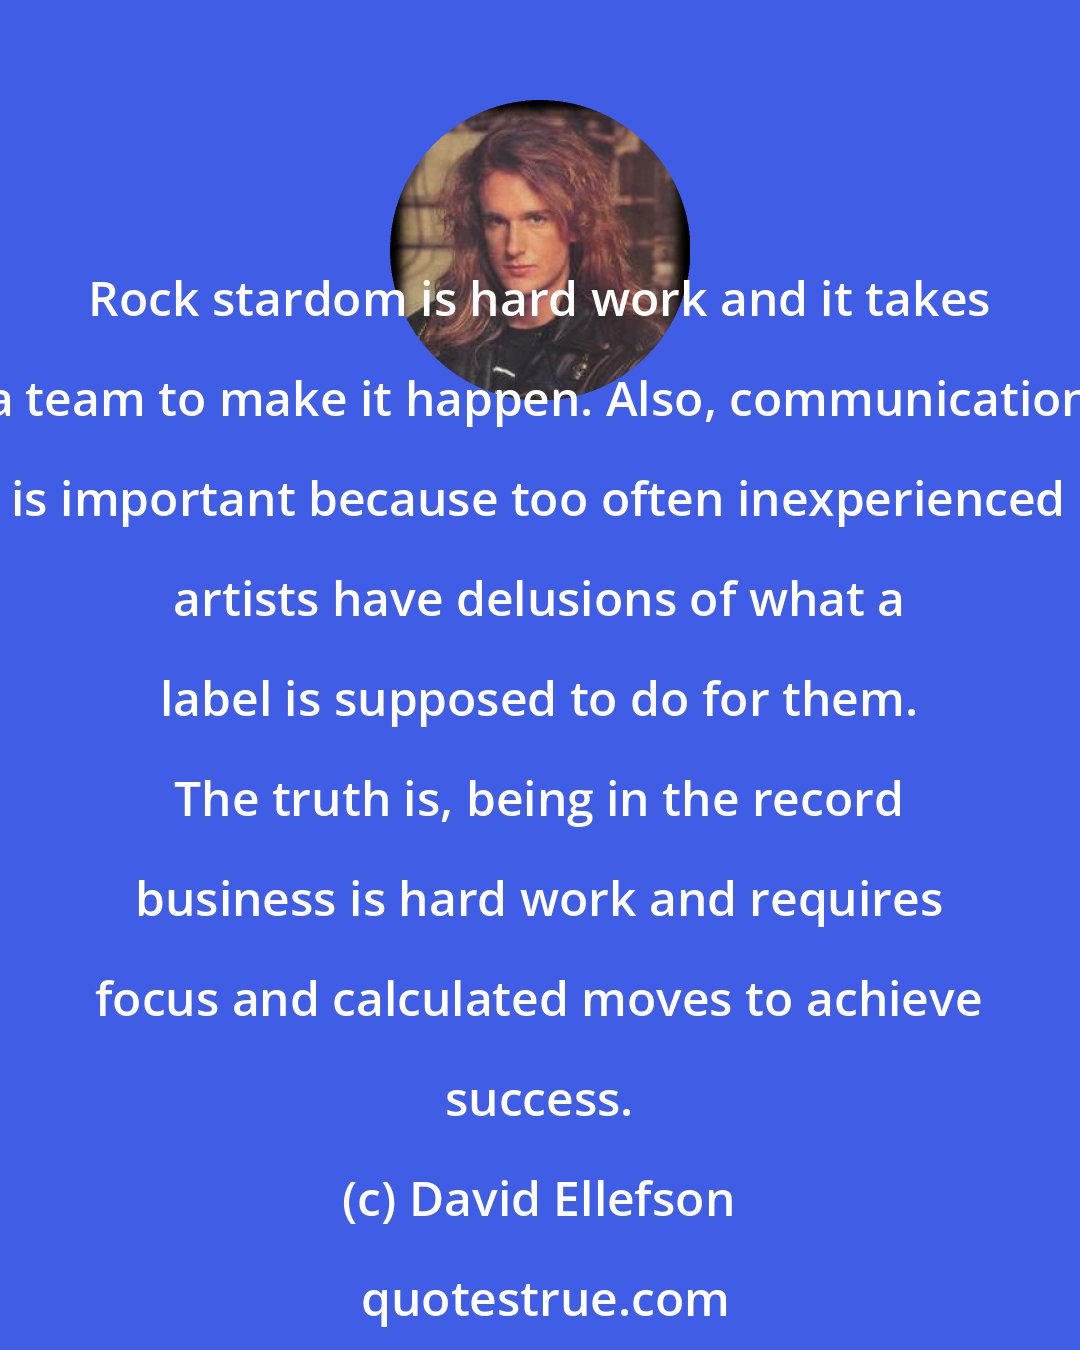 David Ellefson: Rock stardom is hard work and it takes a team to make it happen. Also, communication is important because too often inexperienced artists have delusions of what a label is supposed to do for them. The truth is, being in the record business is hard work and requires focus and calculated moves to achieve success.